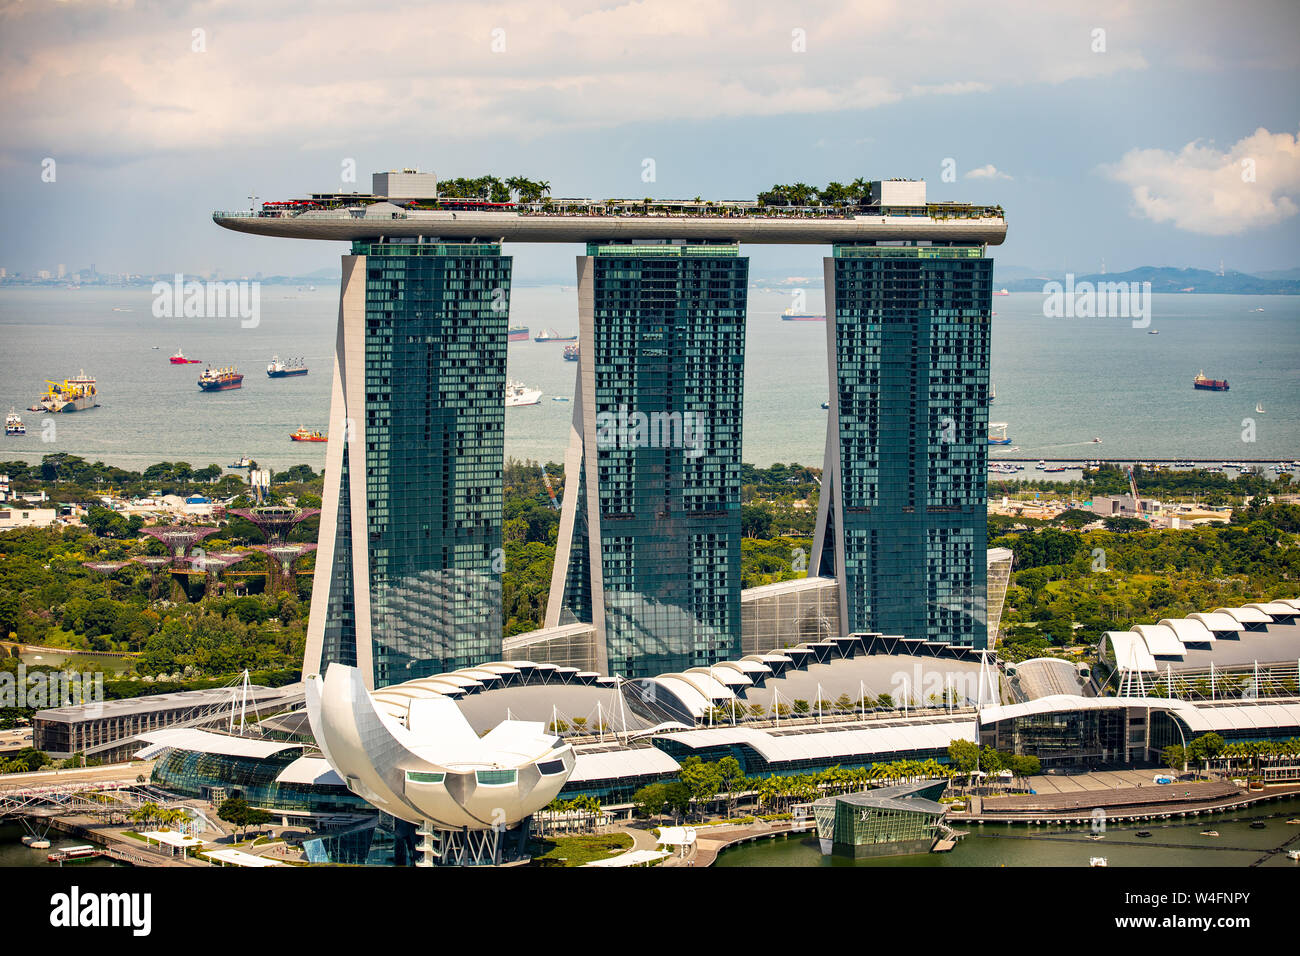 Marina Bay Sands Hotel during the day Stock Photo